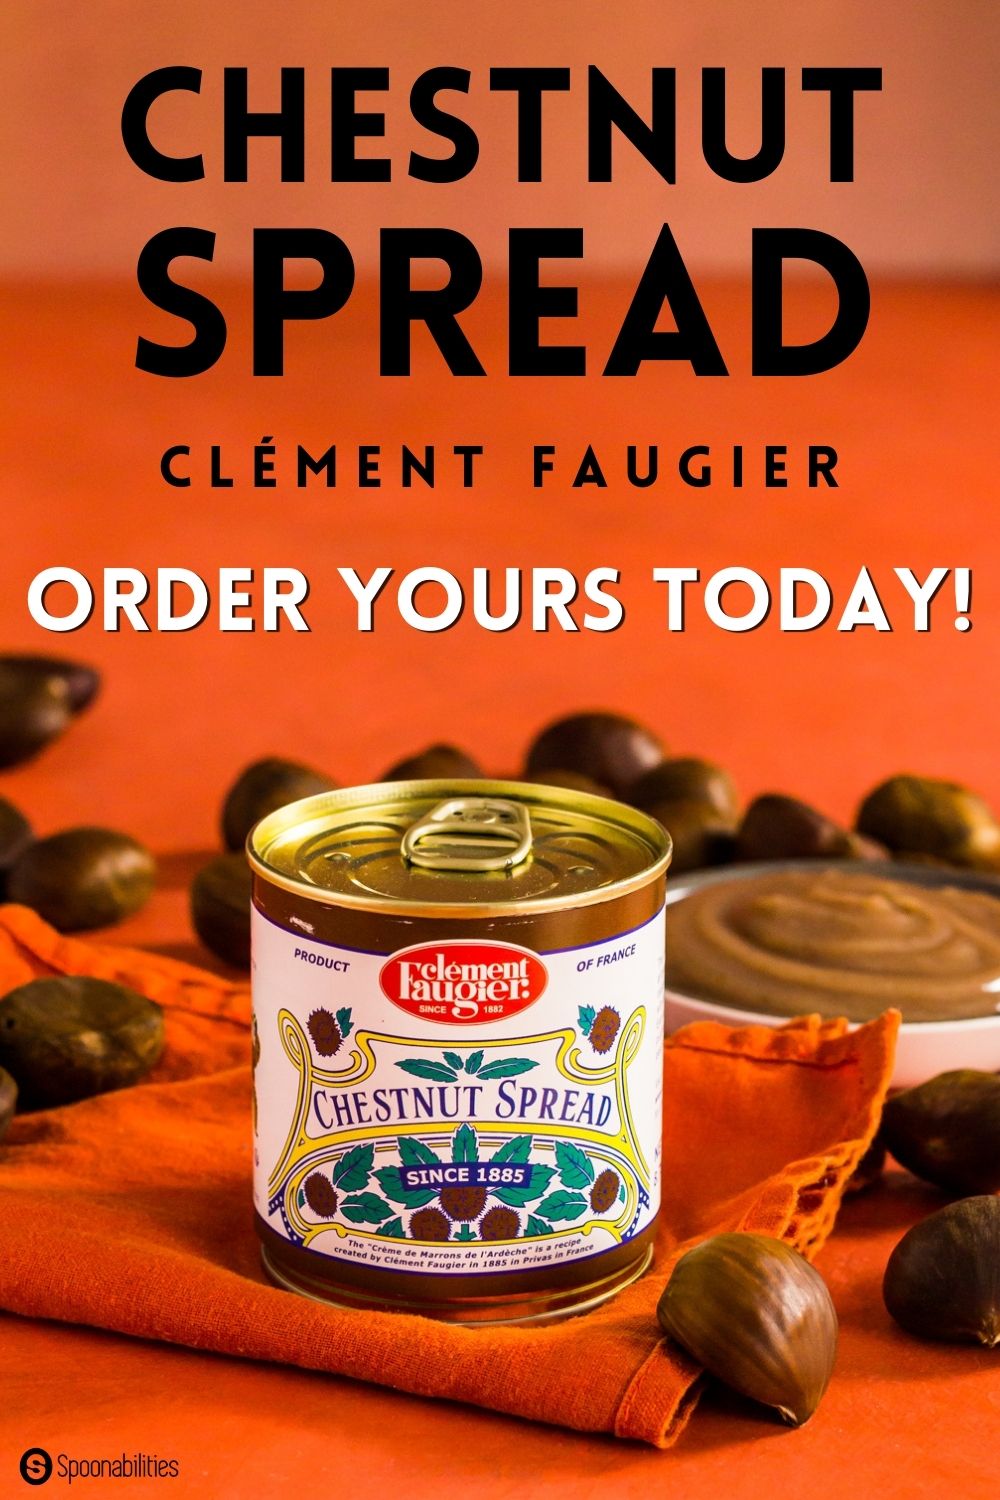 Chestnut Spread by Clement Faugier